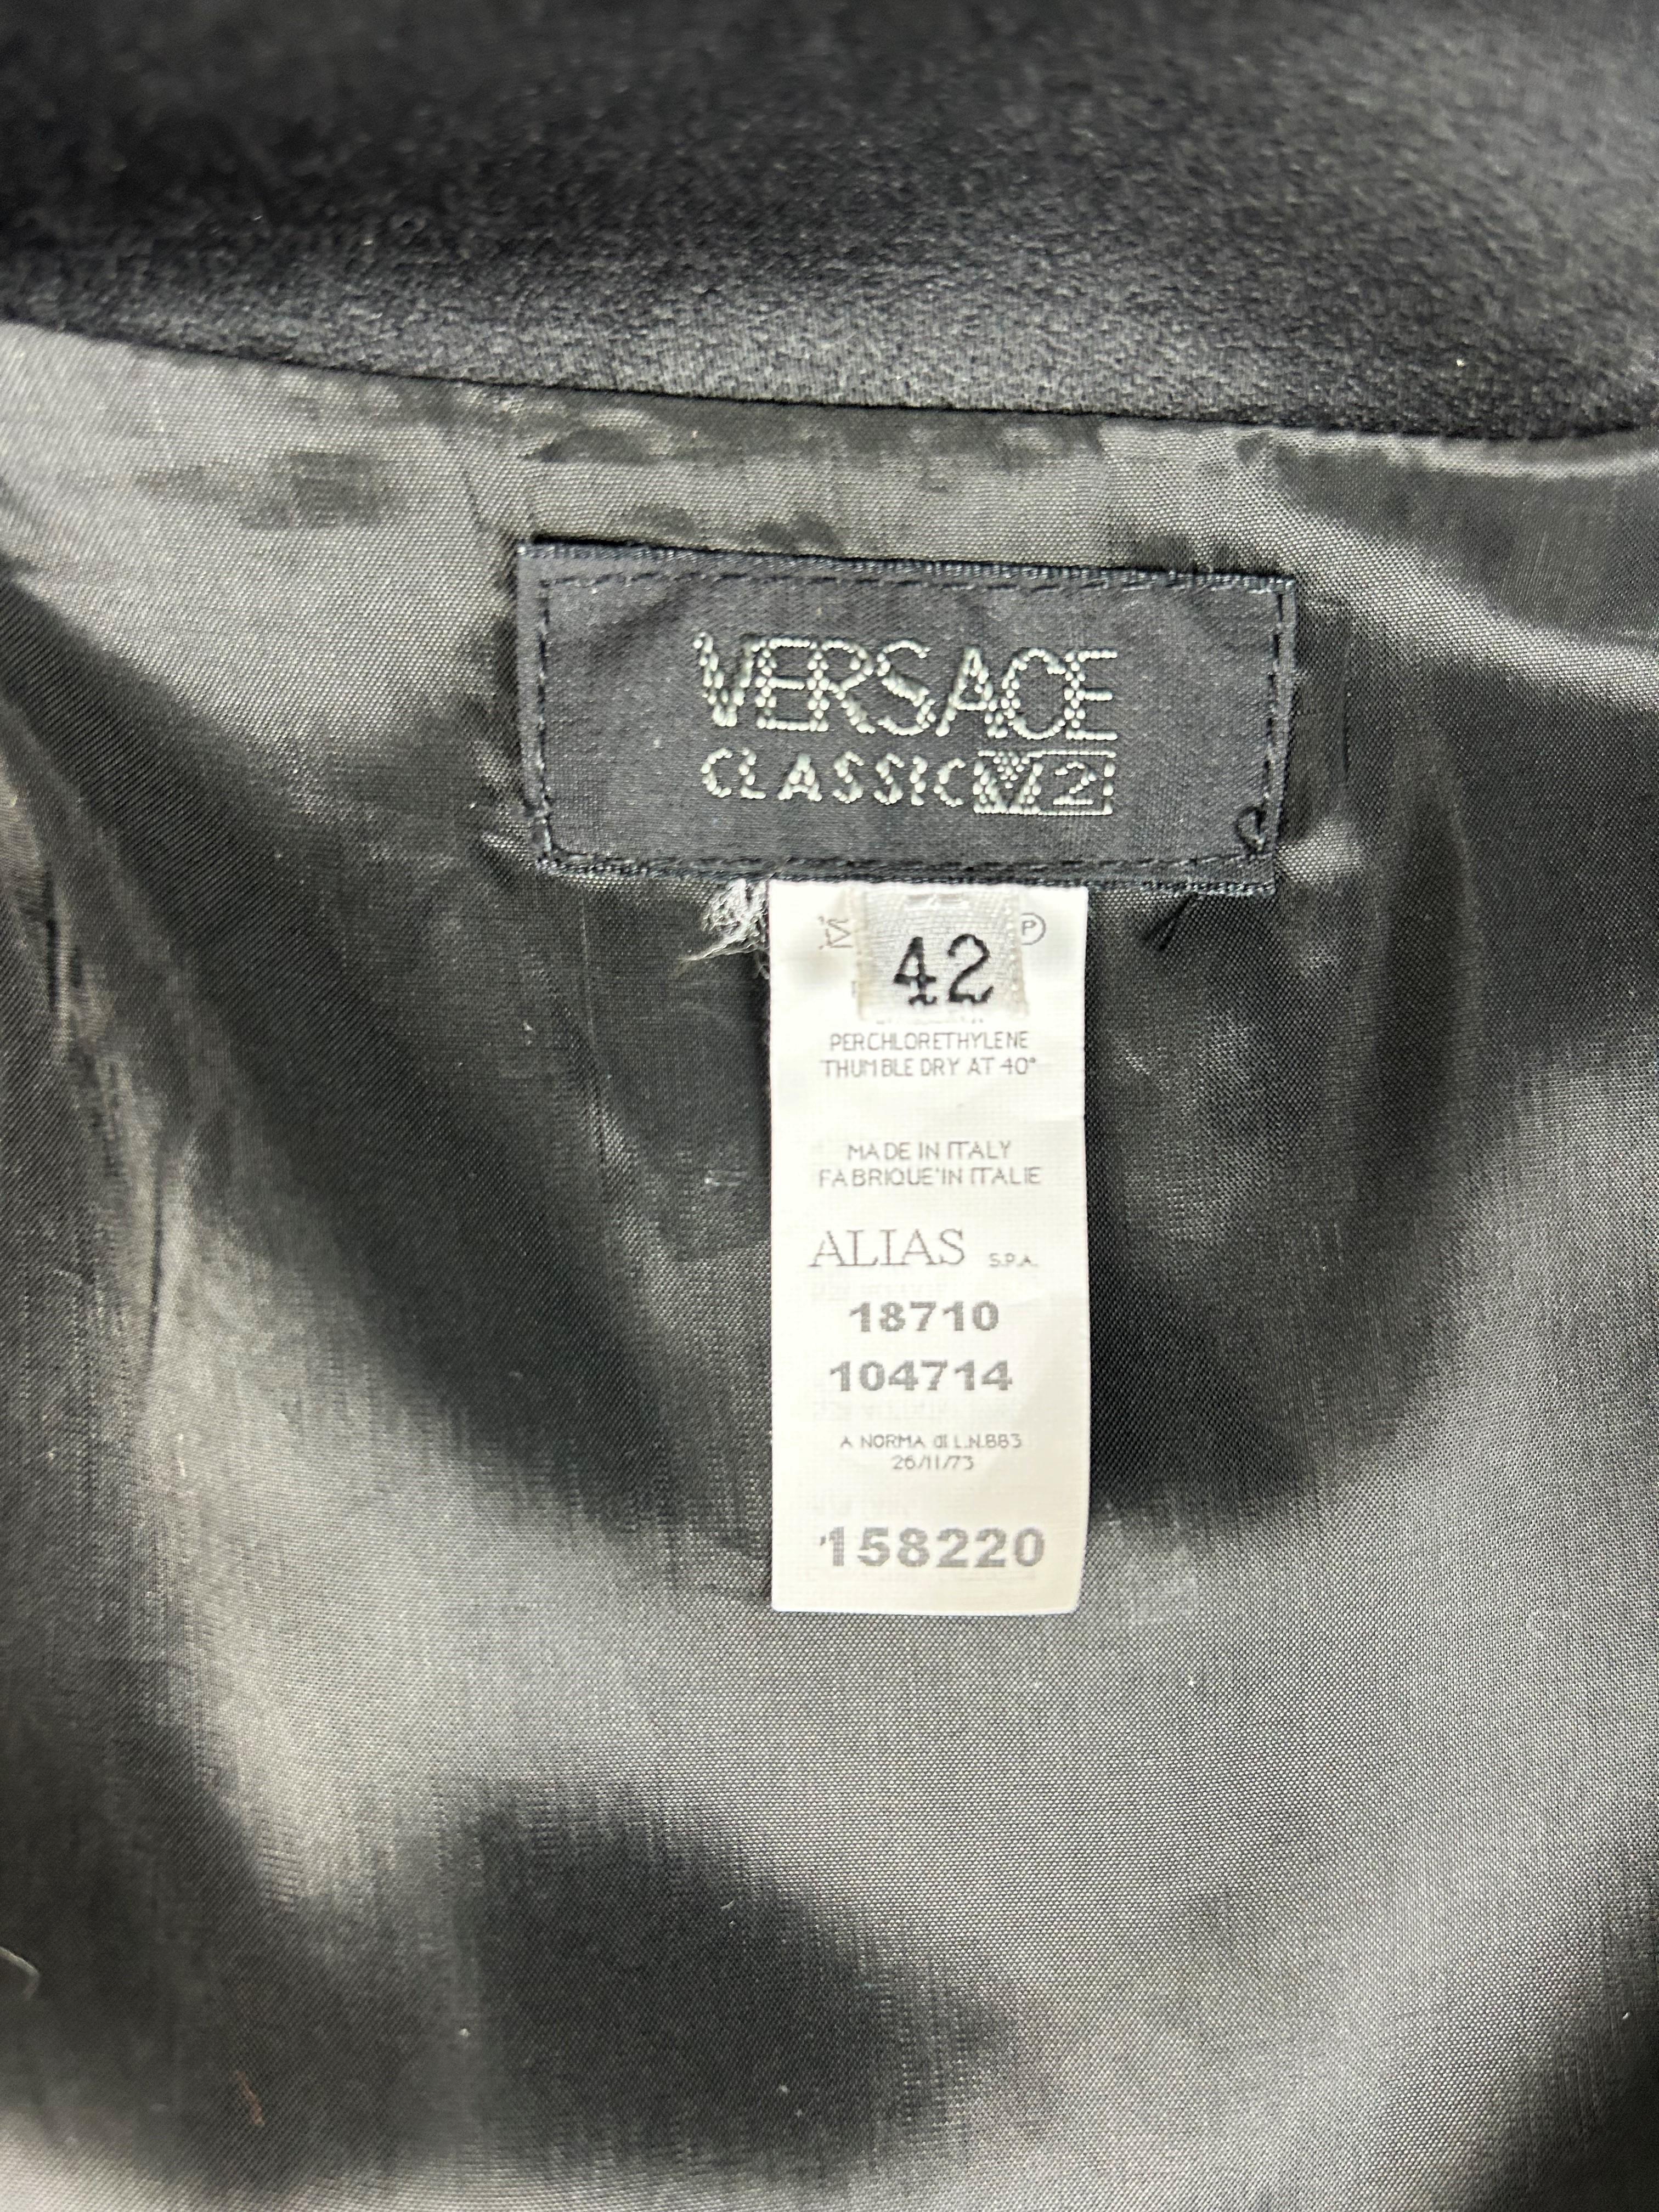 Versace Classic V2 Evening Tuxedo Coat - Italy Circa 2000 In Good Condition For Sale In Toulon, FR